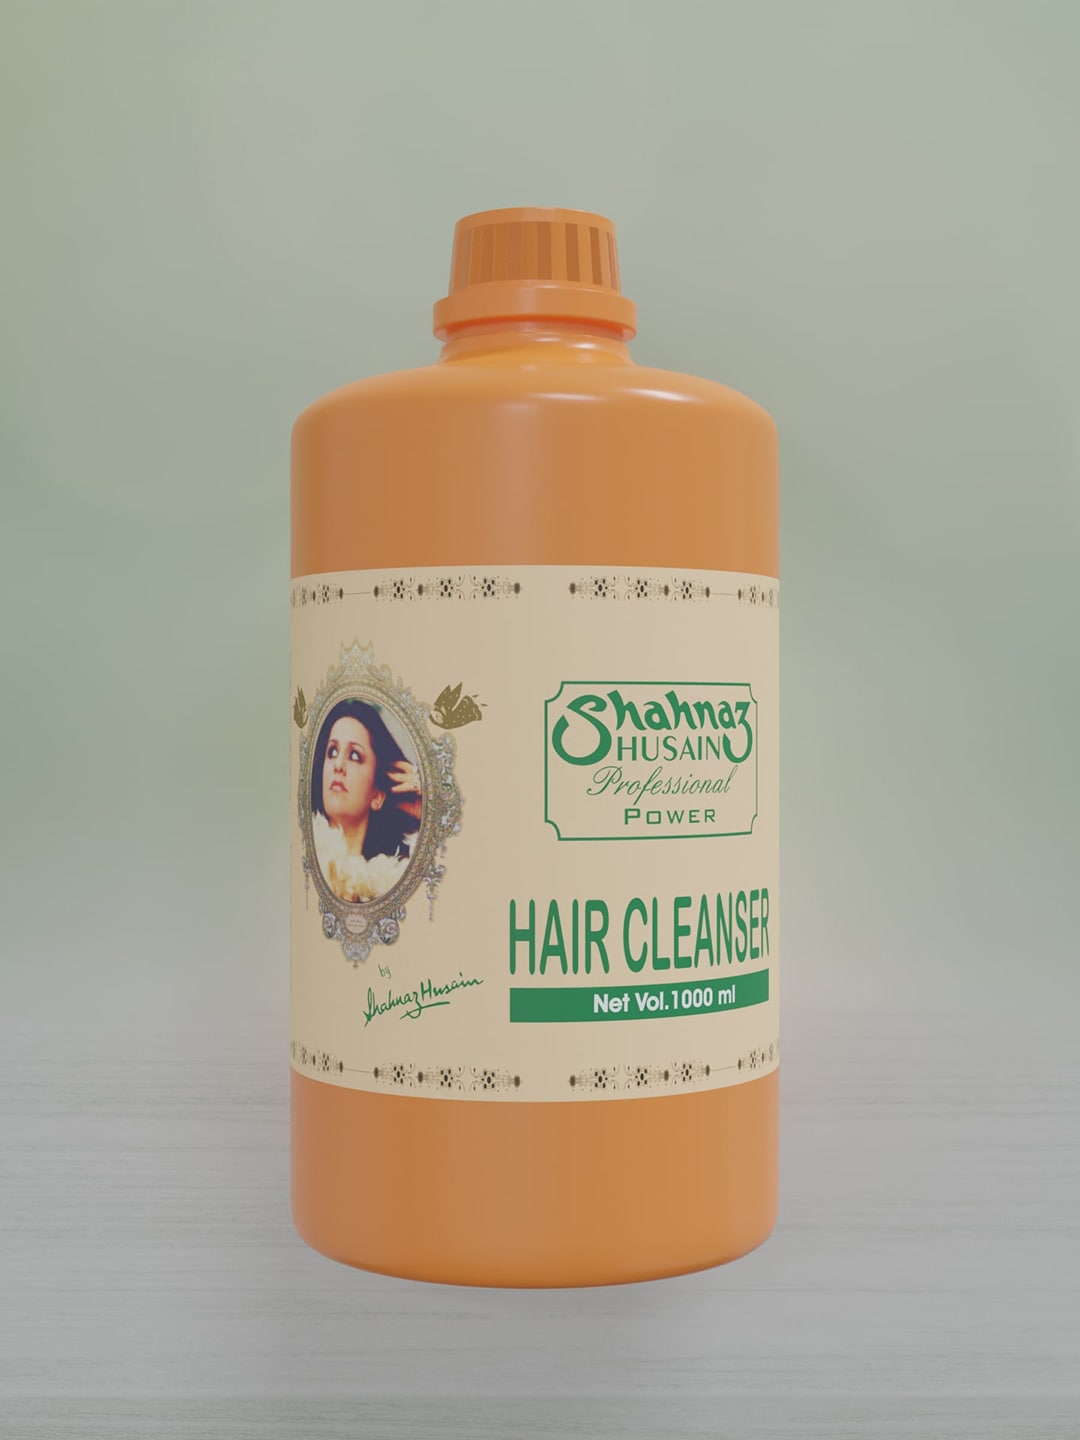 Shahnaz Husain Professional Power Hair Cleanser - 1000ml Price in India